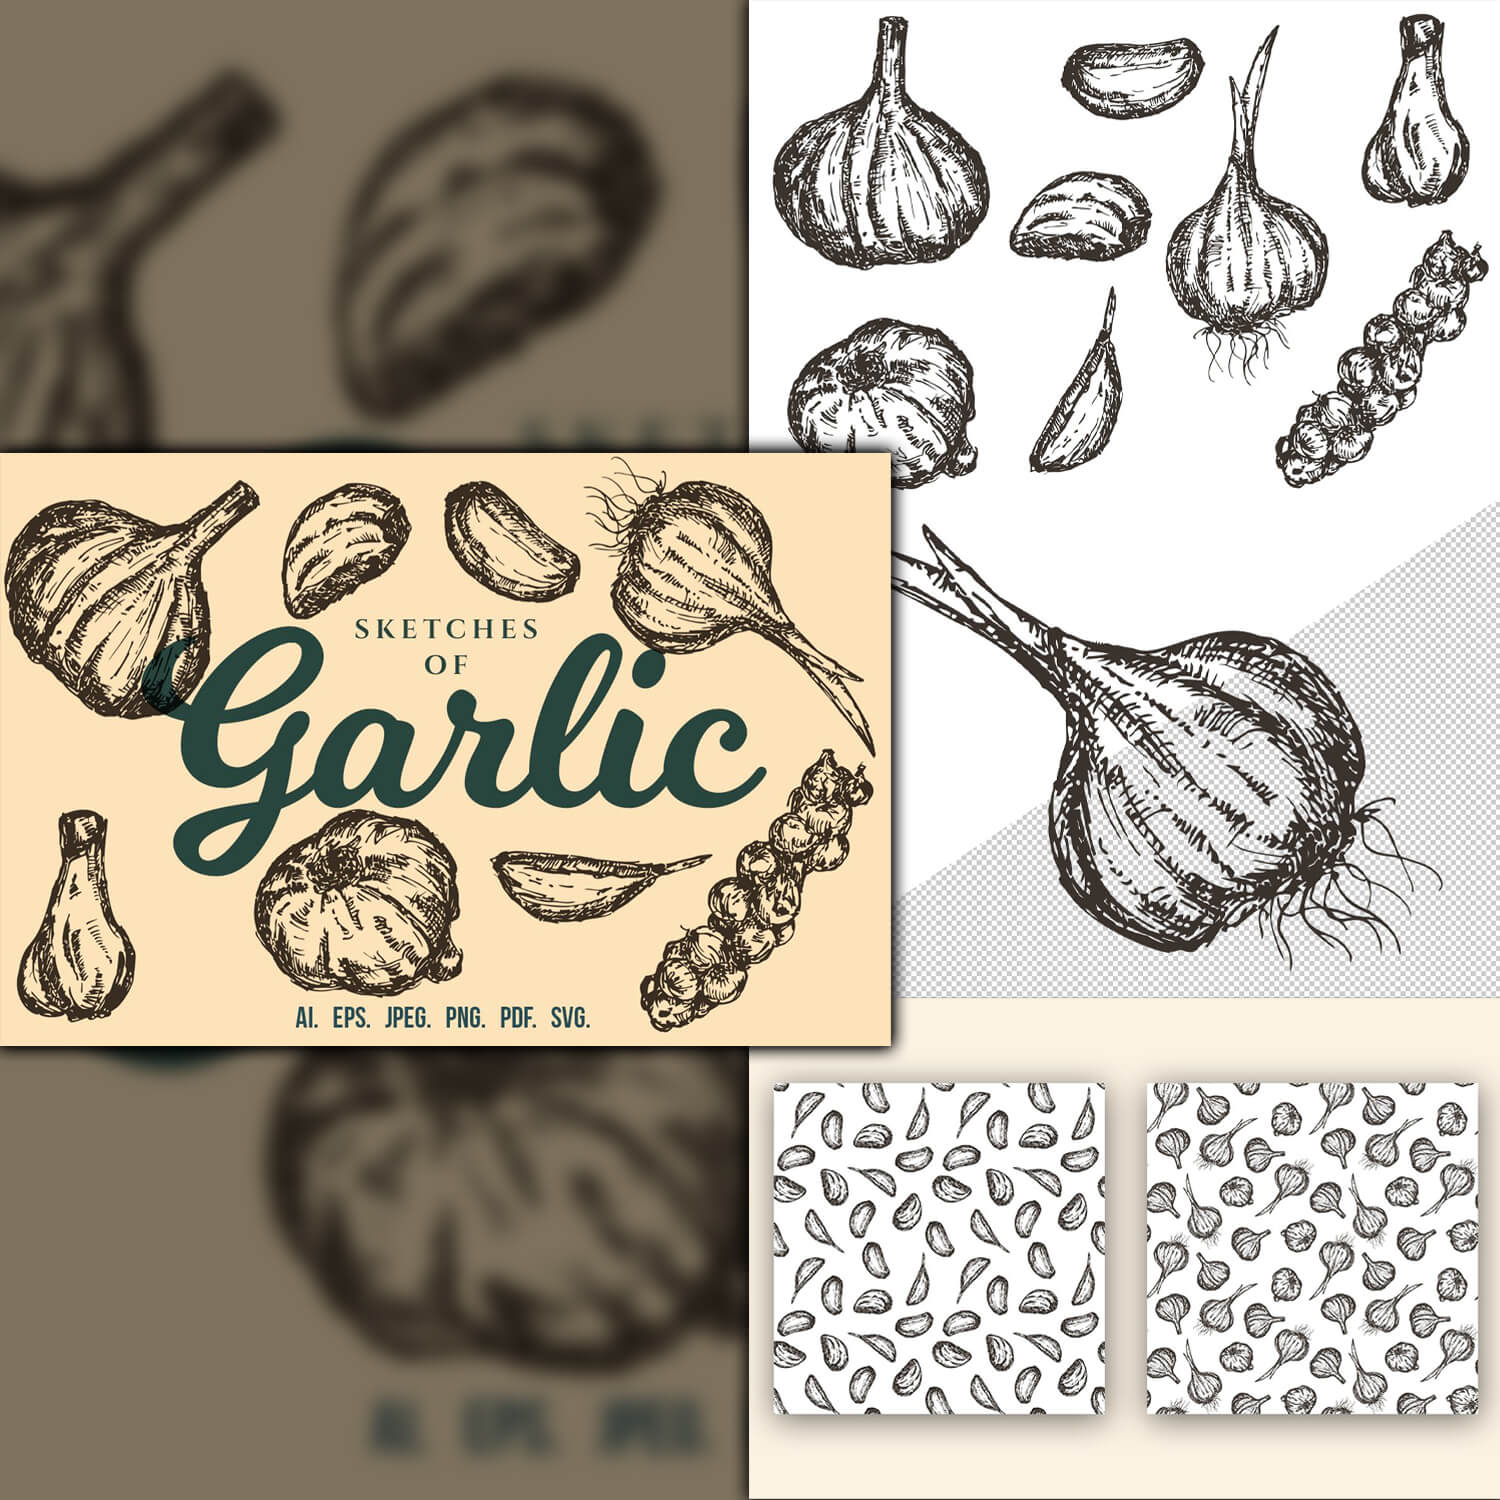 Sketches of images of onions and garlic.